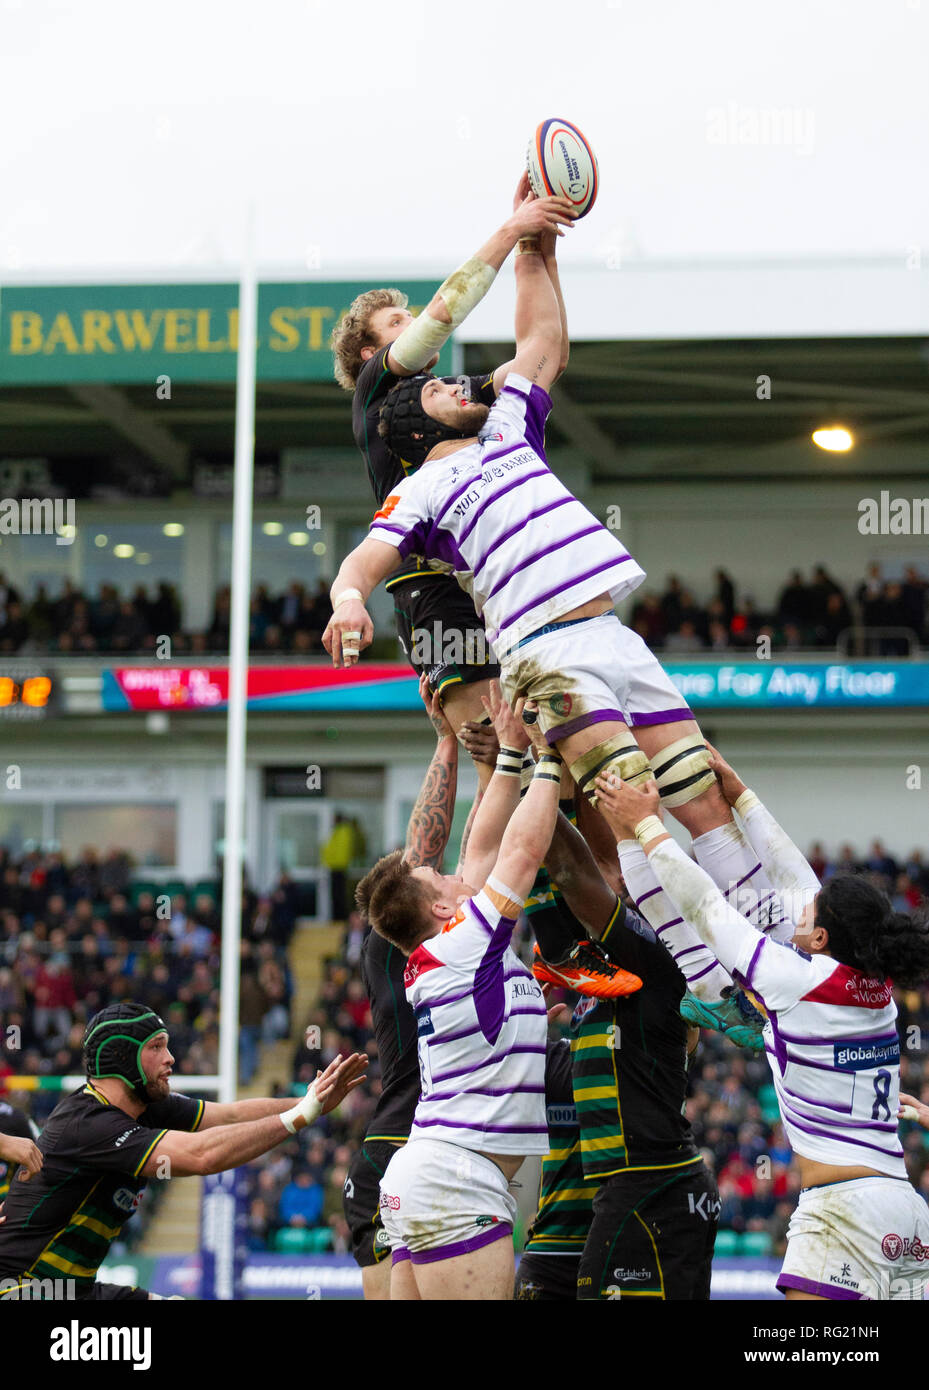 Northampton, UK. 26th January 2019. Harry Wells of Leicester Tigers competes with Jamie Gibson for a line out ball during the Premiership Rugby Cup match between Northampton Saints and Leicester Tigers. Andrew Taylor/Alamy Live News Stock Photo